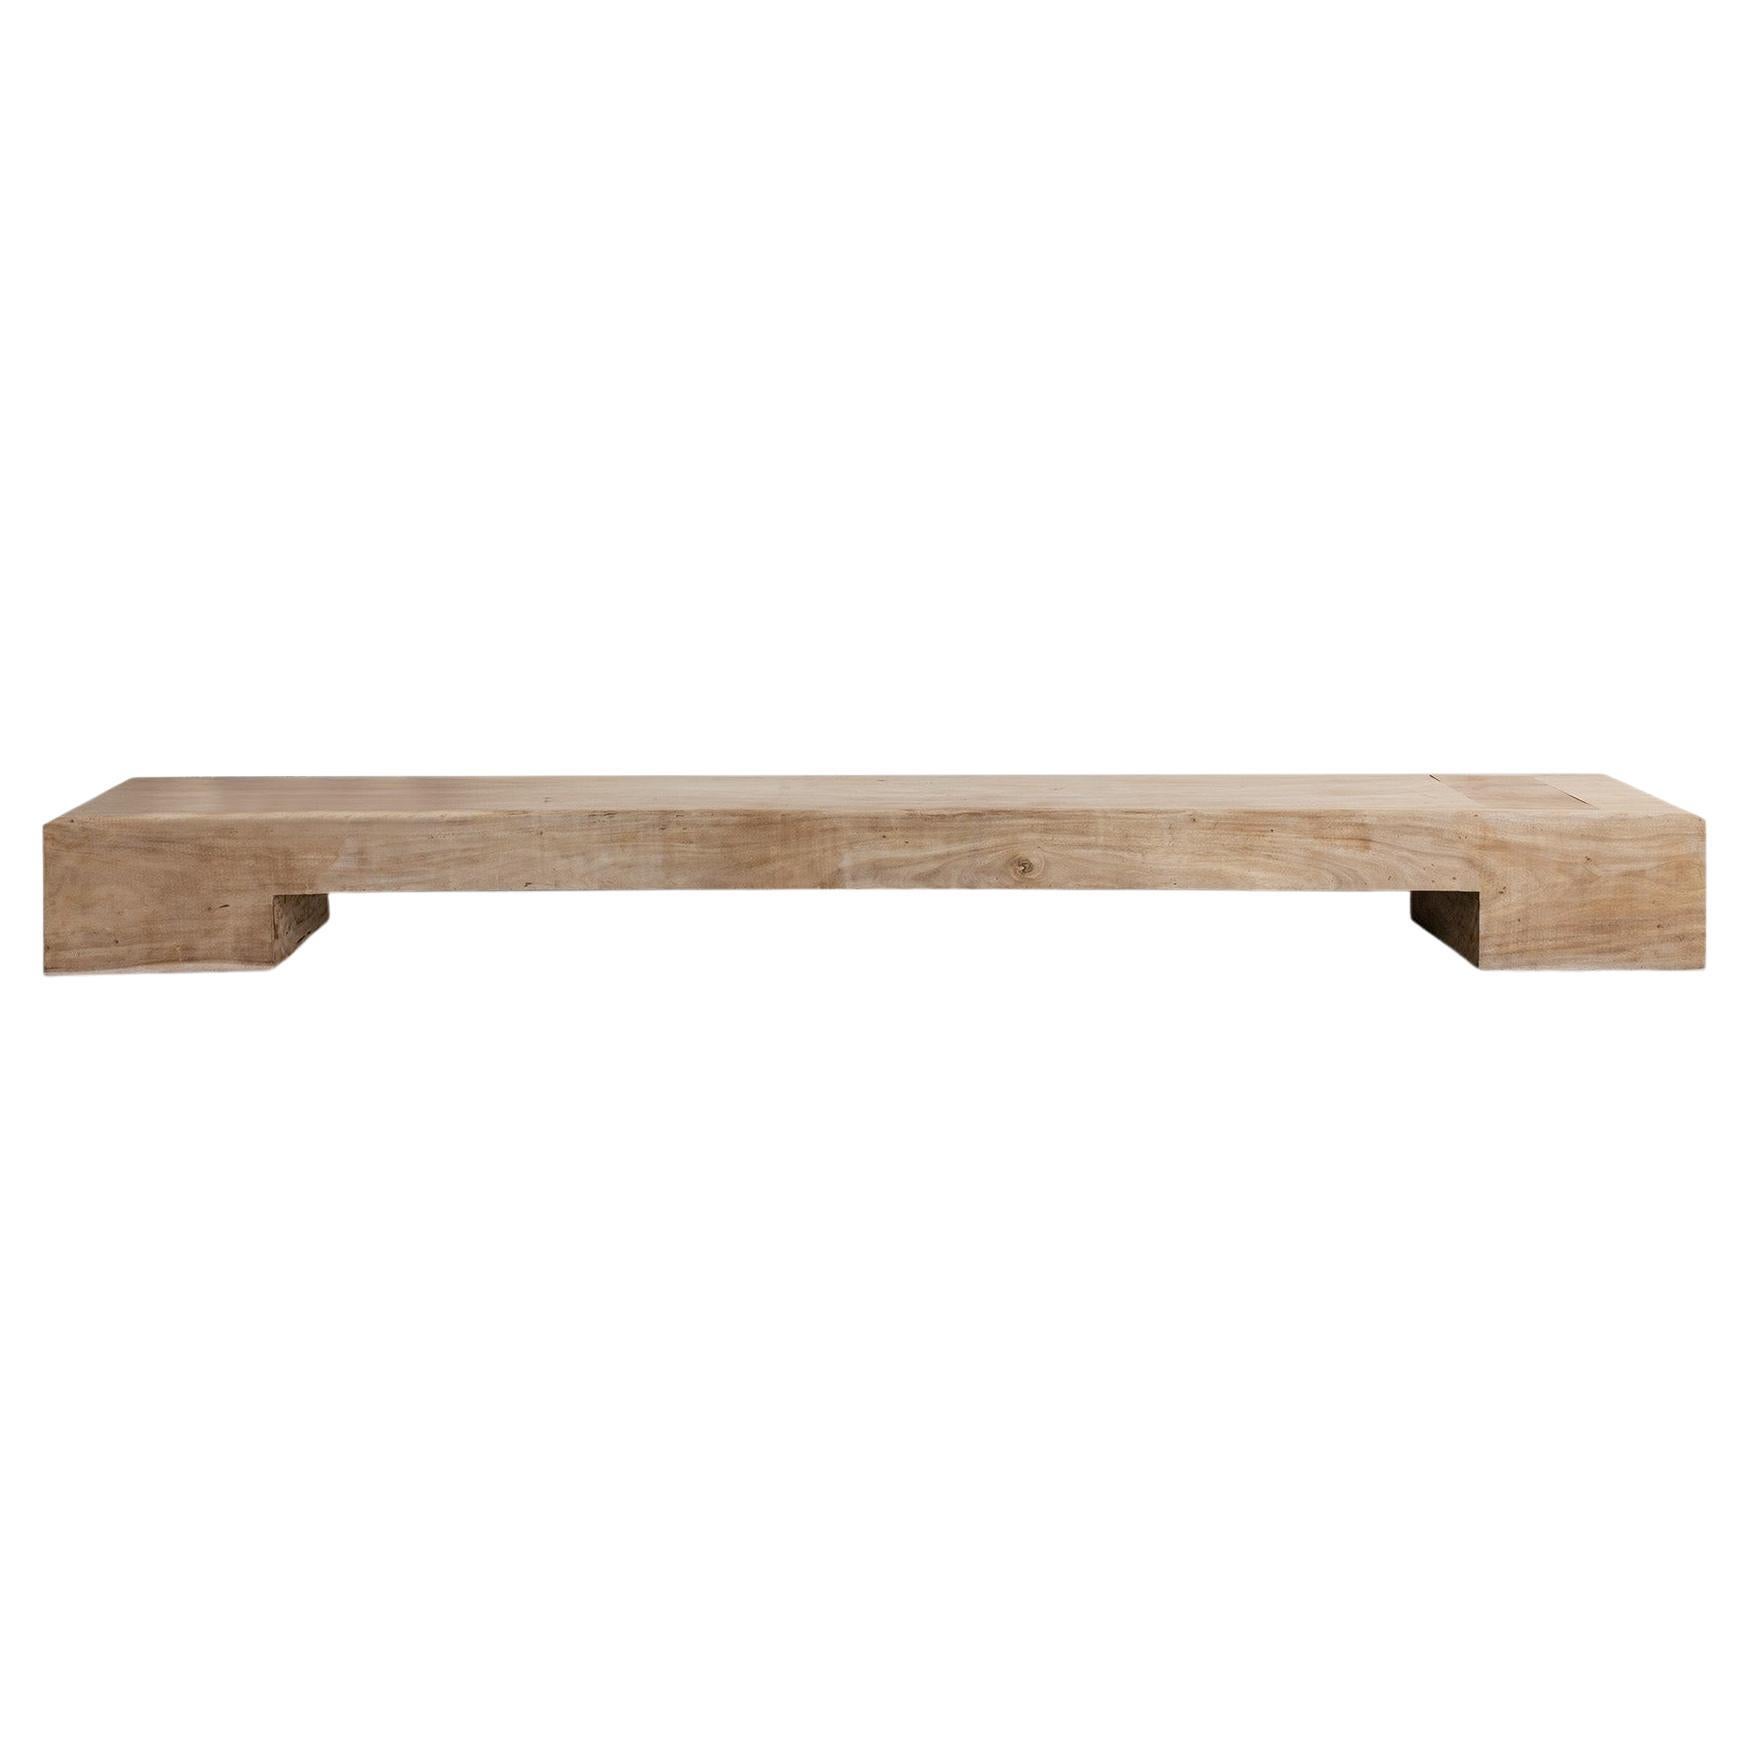 Staple Wood Bench by CEU Studio, Represented by Tuleste Factory For Sale